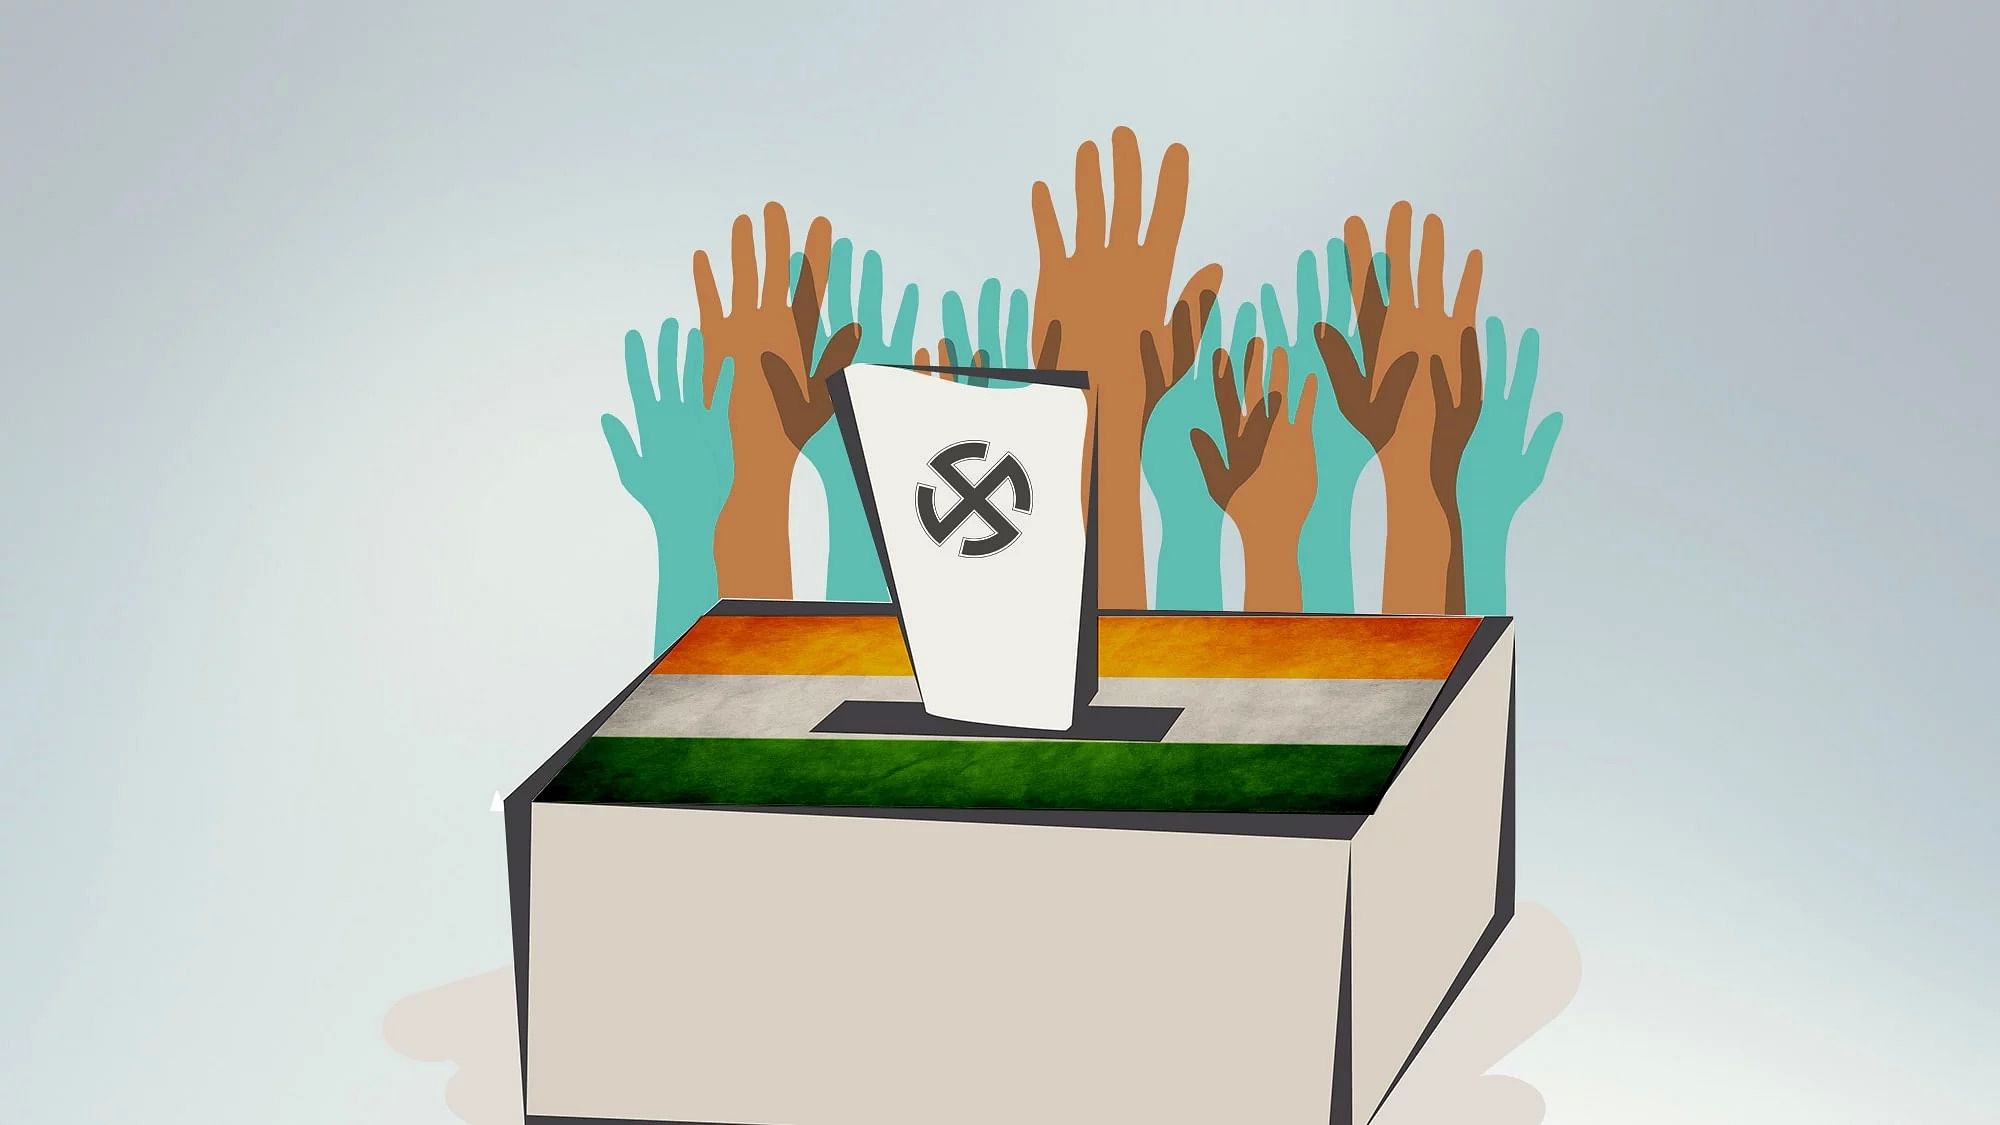 Bihar Election 2020: It is absolutely unreasonable to expect pre-poll survey to be a tool for correctly forecasting the voting day outcome.